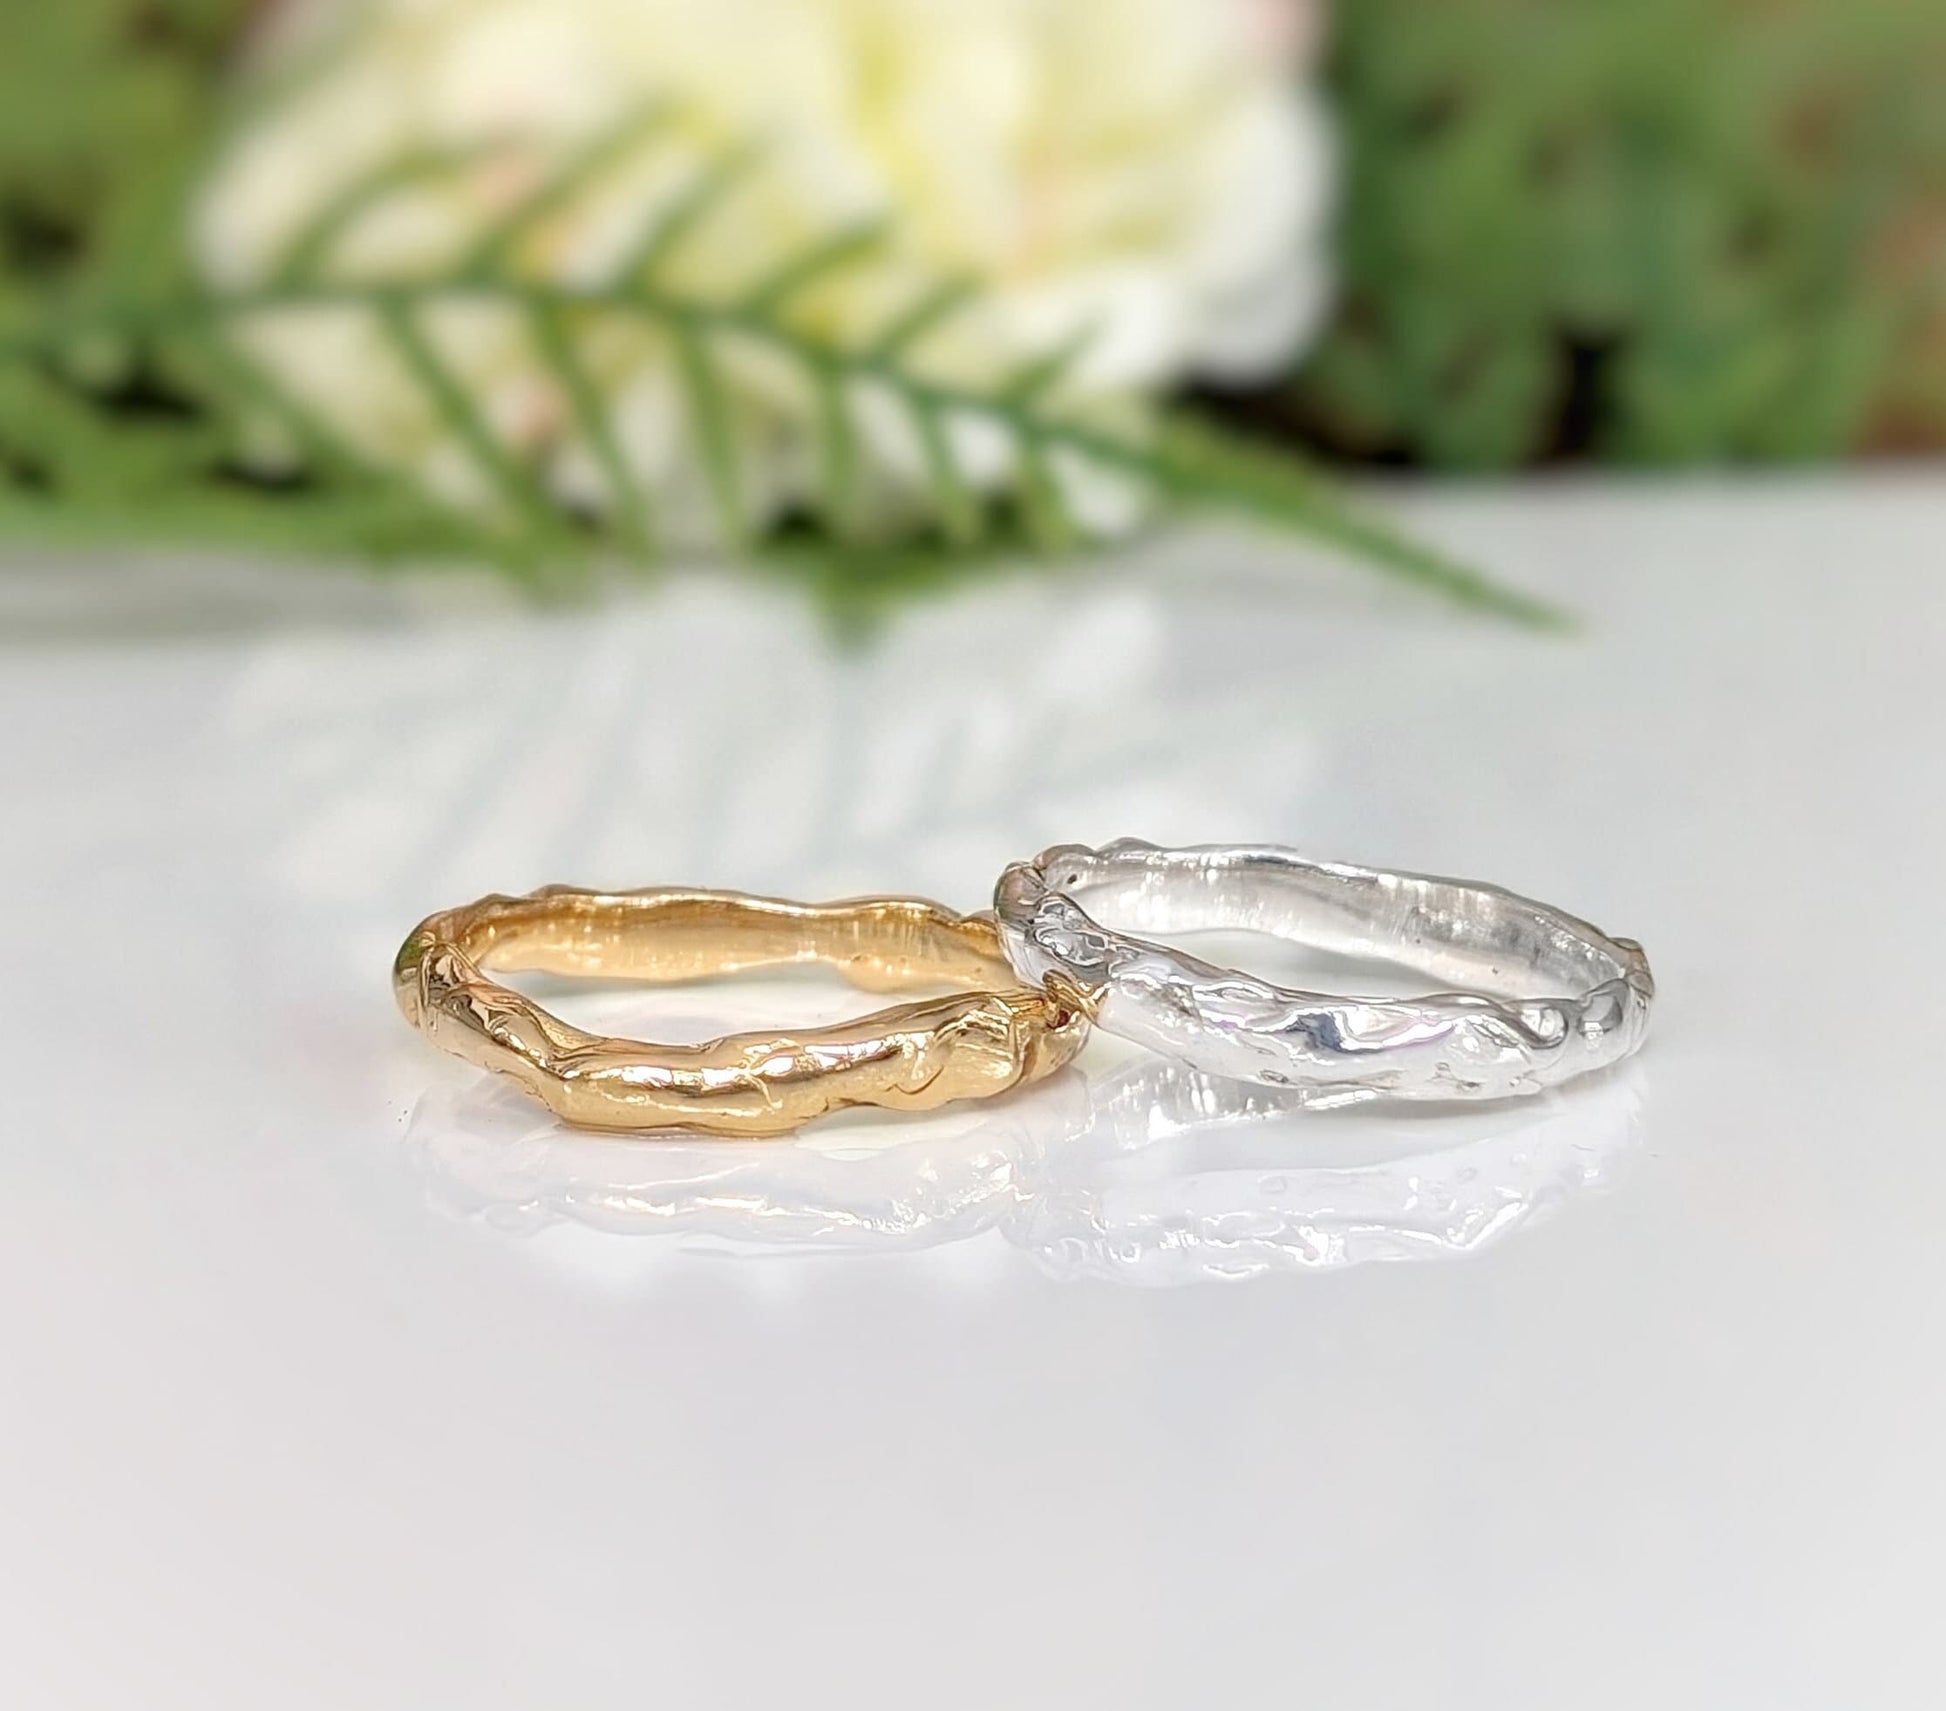 Set of 2 Set of two Solid 14k Gold and Sterling Silver molten textured bands